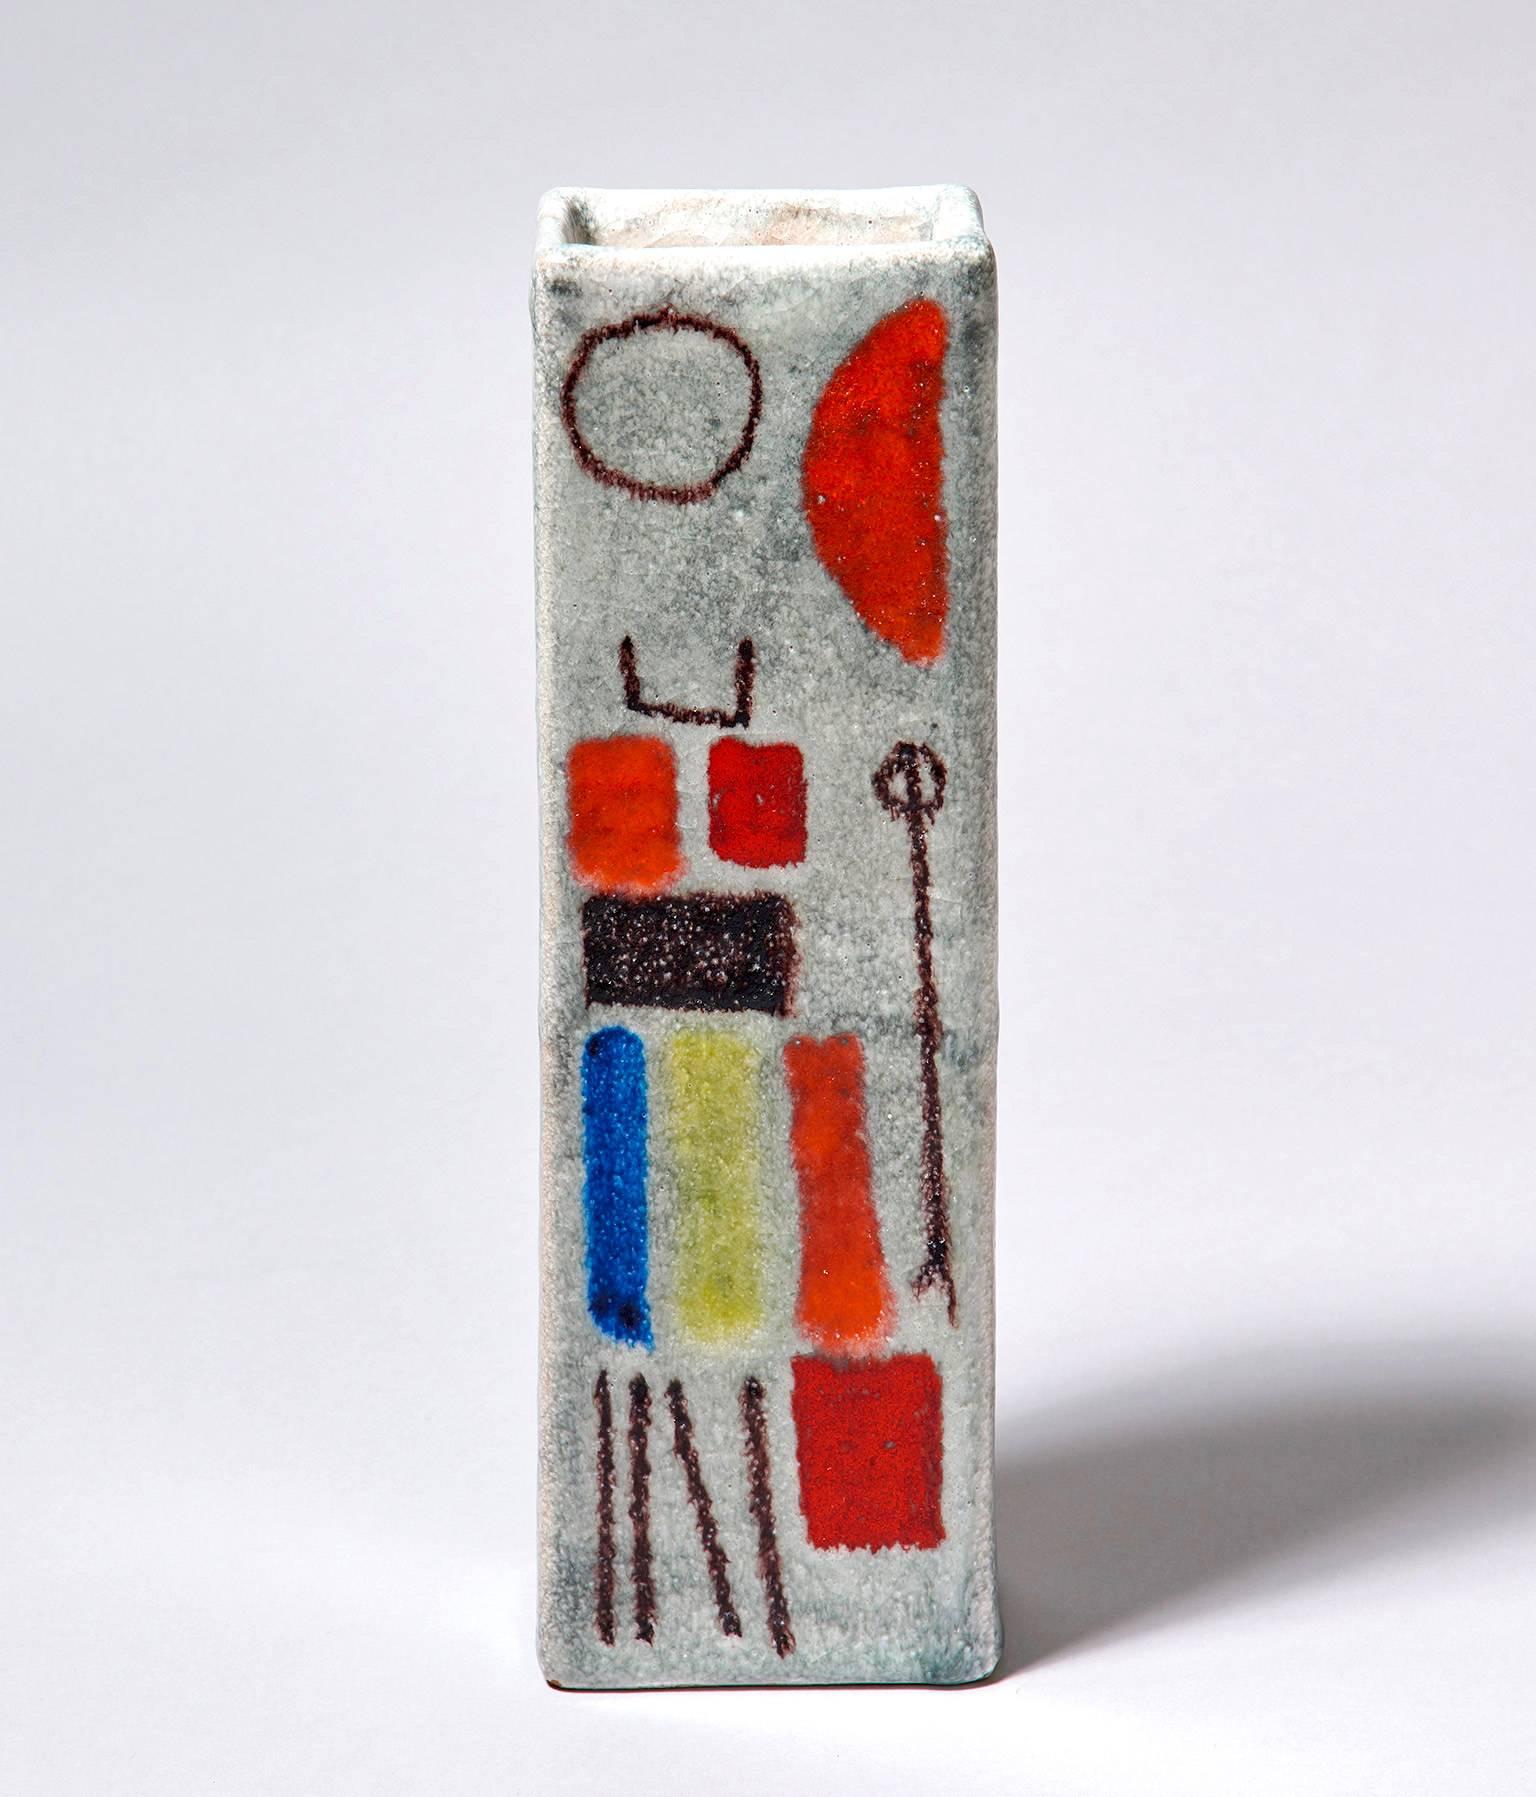 An excellent slab-built vase of rectangular section, made in the early 1950s by Guido Gambone, post-war Italy's most celebrated ceramist. Decorated with abstract, almost glyphic designs in orange, red, yellow, blue, and aubergine. Signed with the